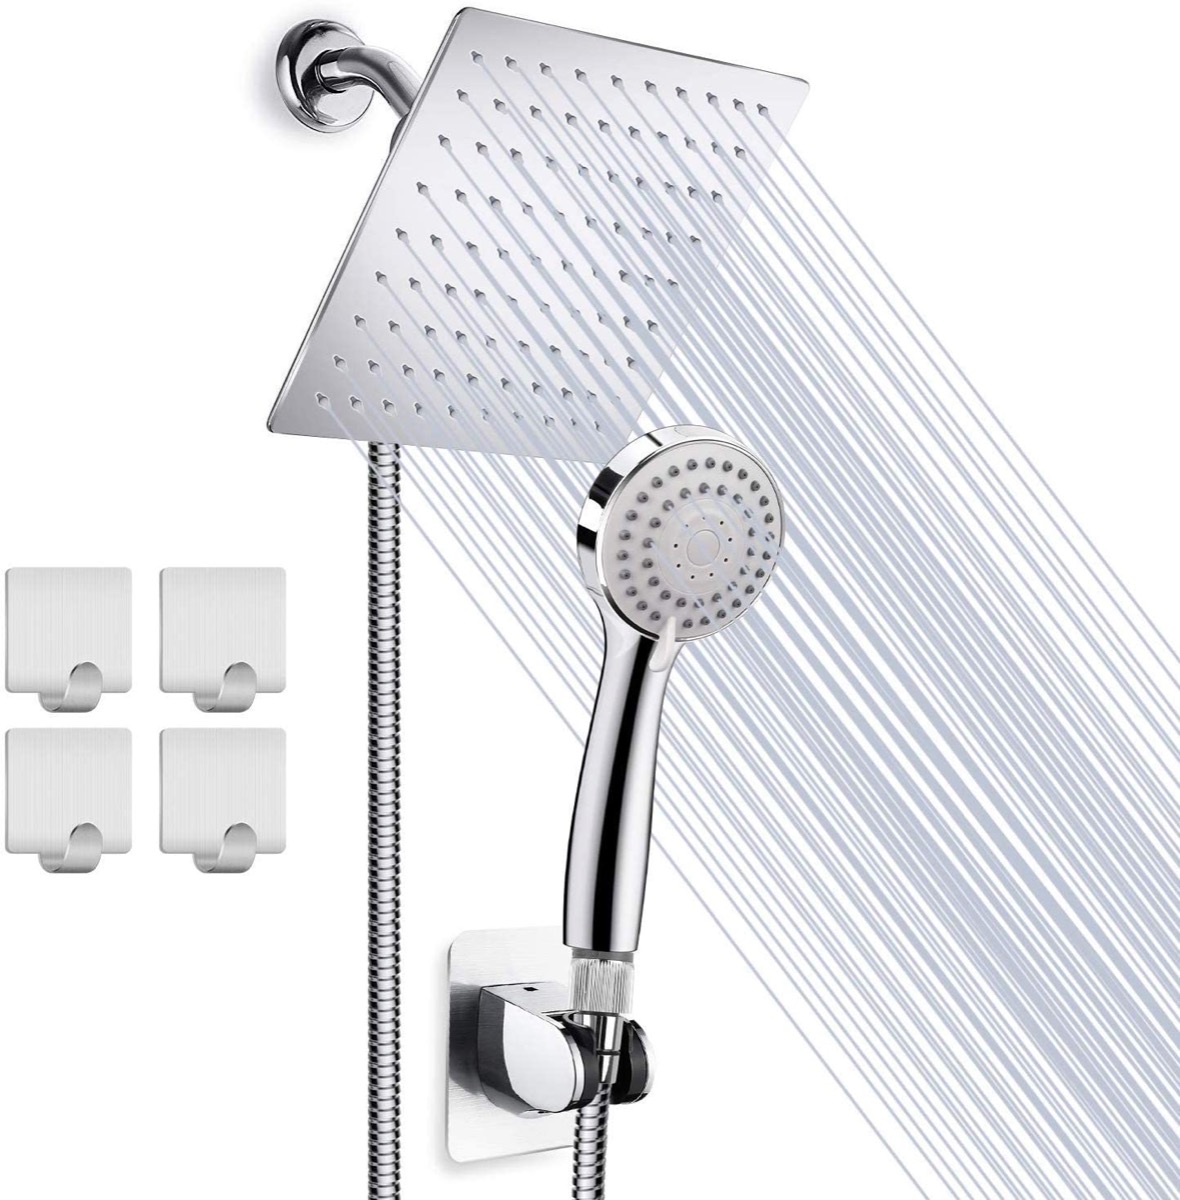 Rain shower head with hand held attachment